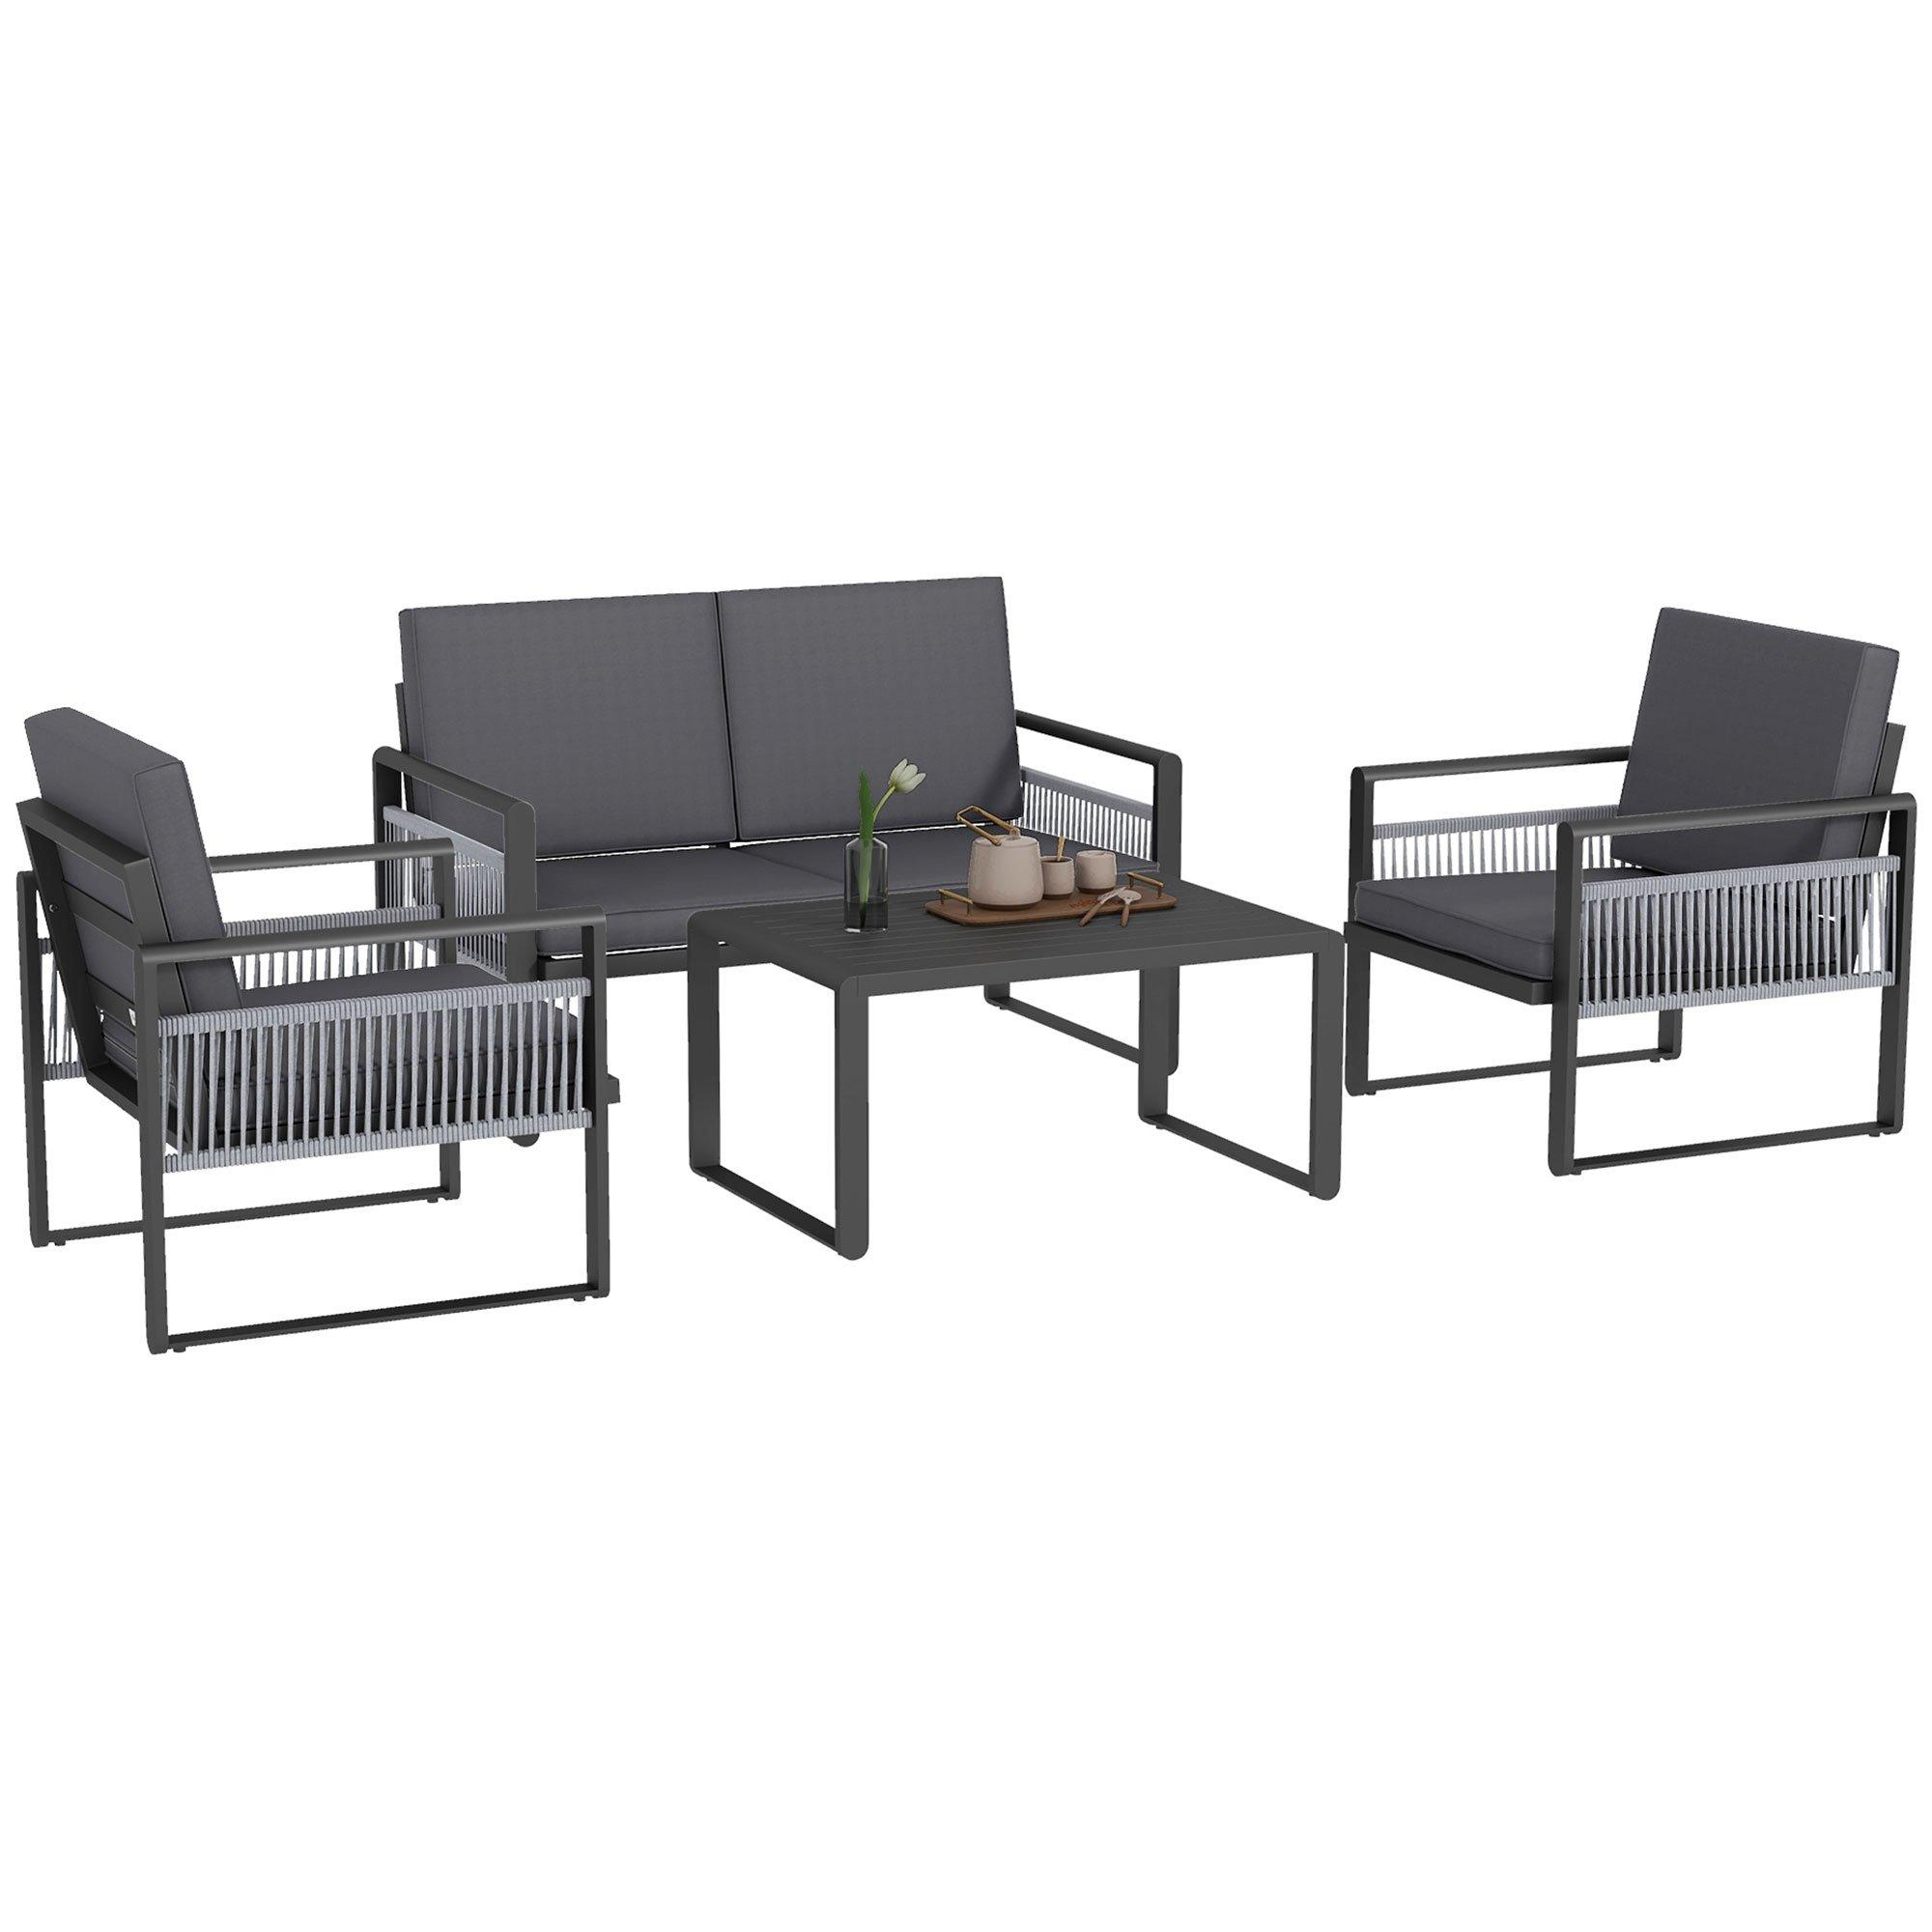 Aluminium Garden Furniture Sets with Cushions, Slatted Top Coffee Table, Black